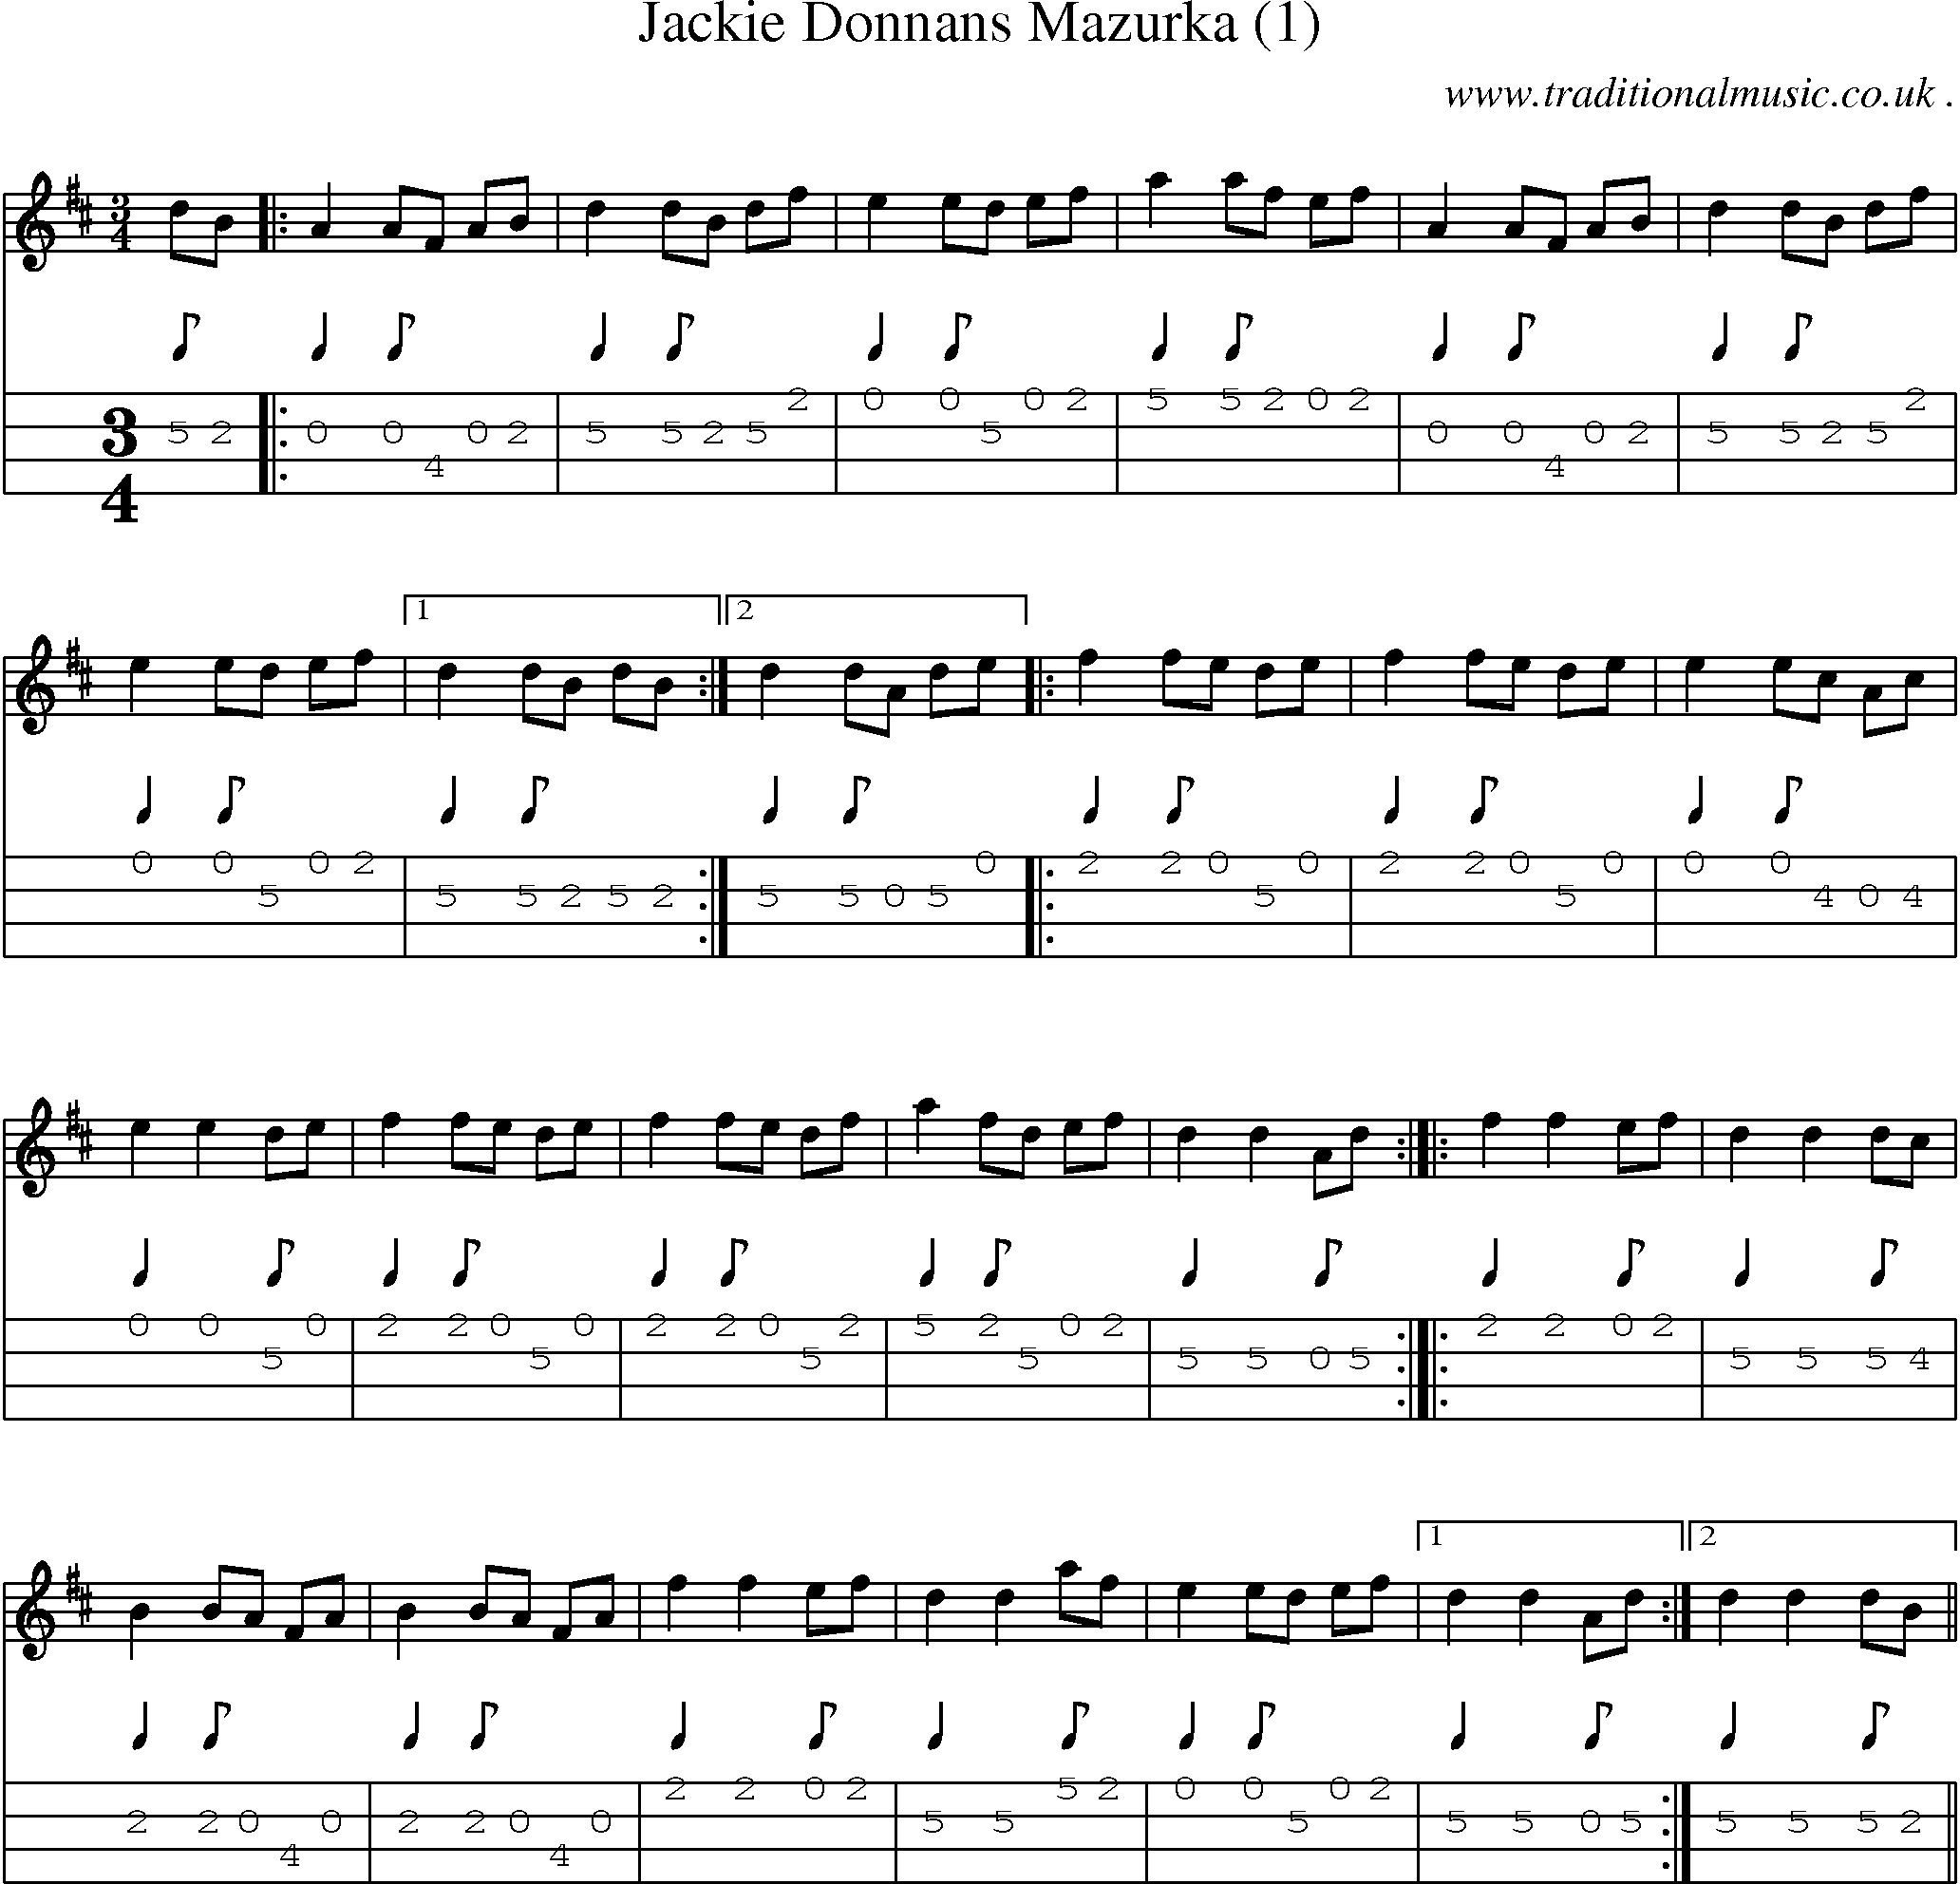 Sheet-Music and Mandolin Tabs for Jackie Donnans Mazurka (1)